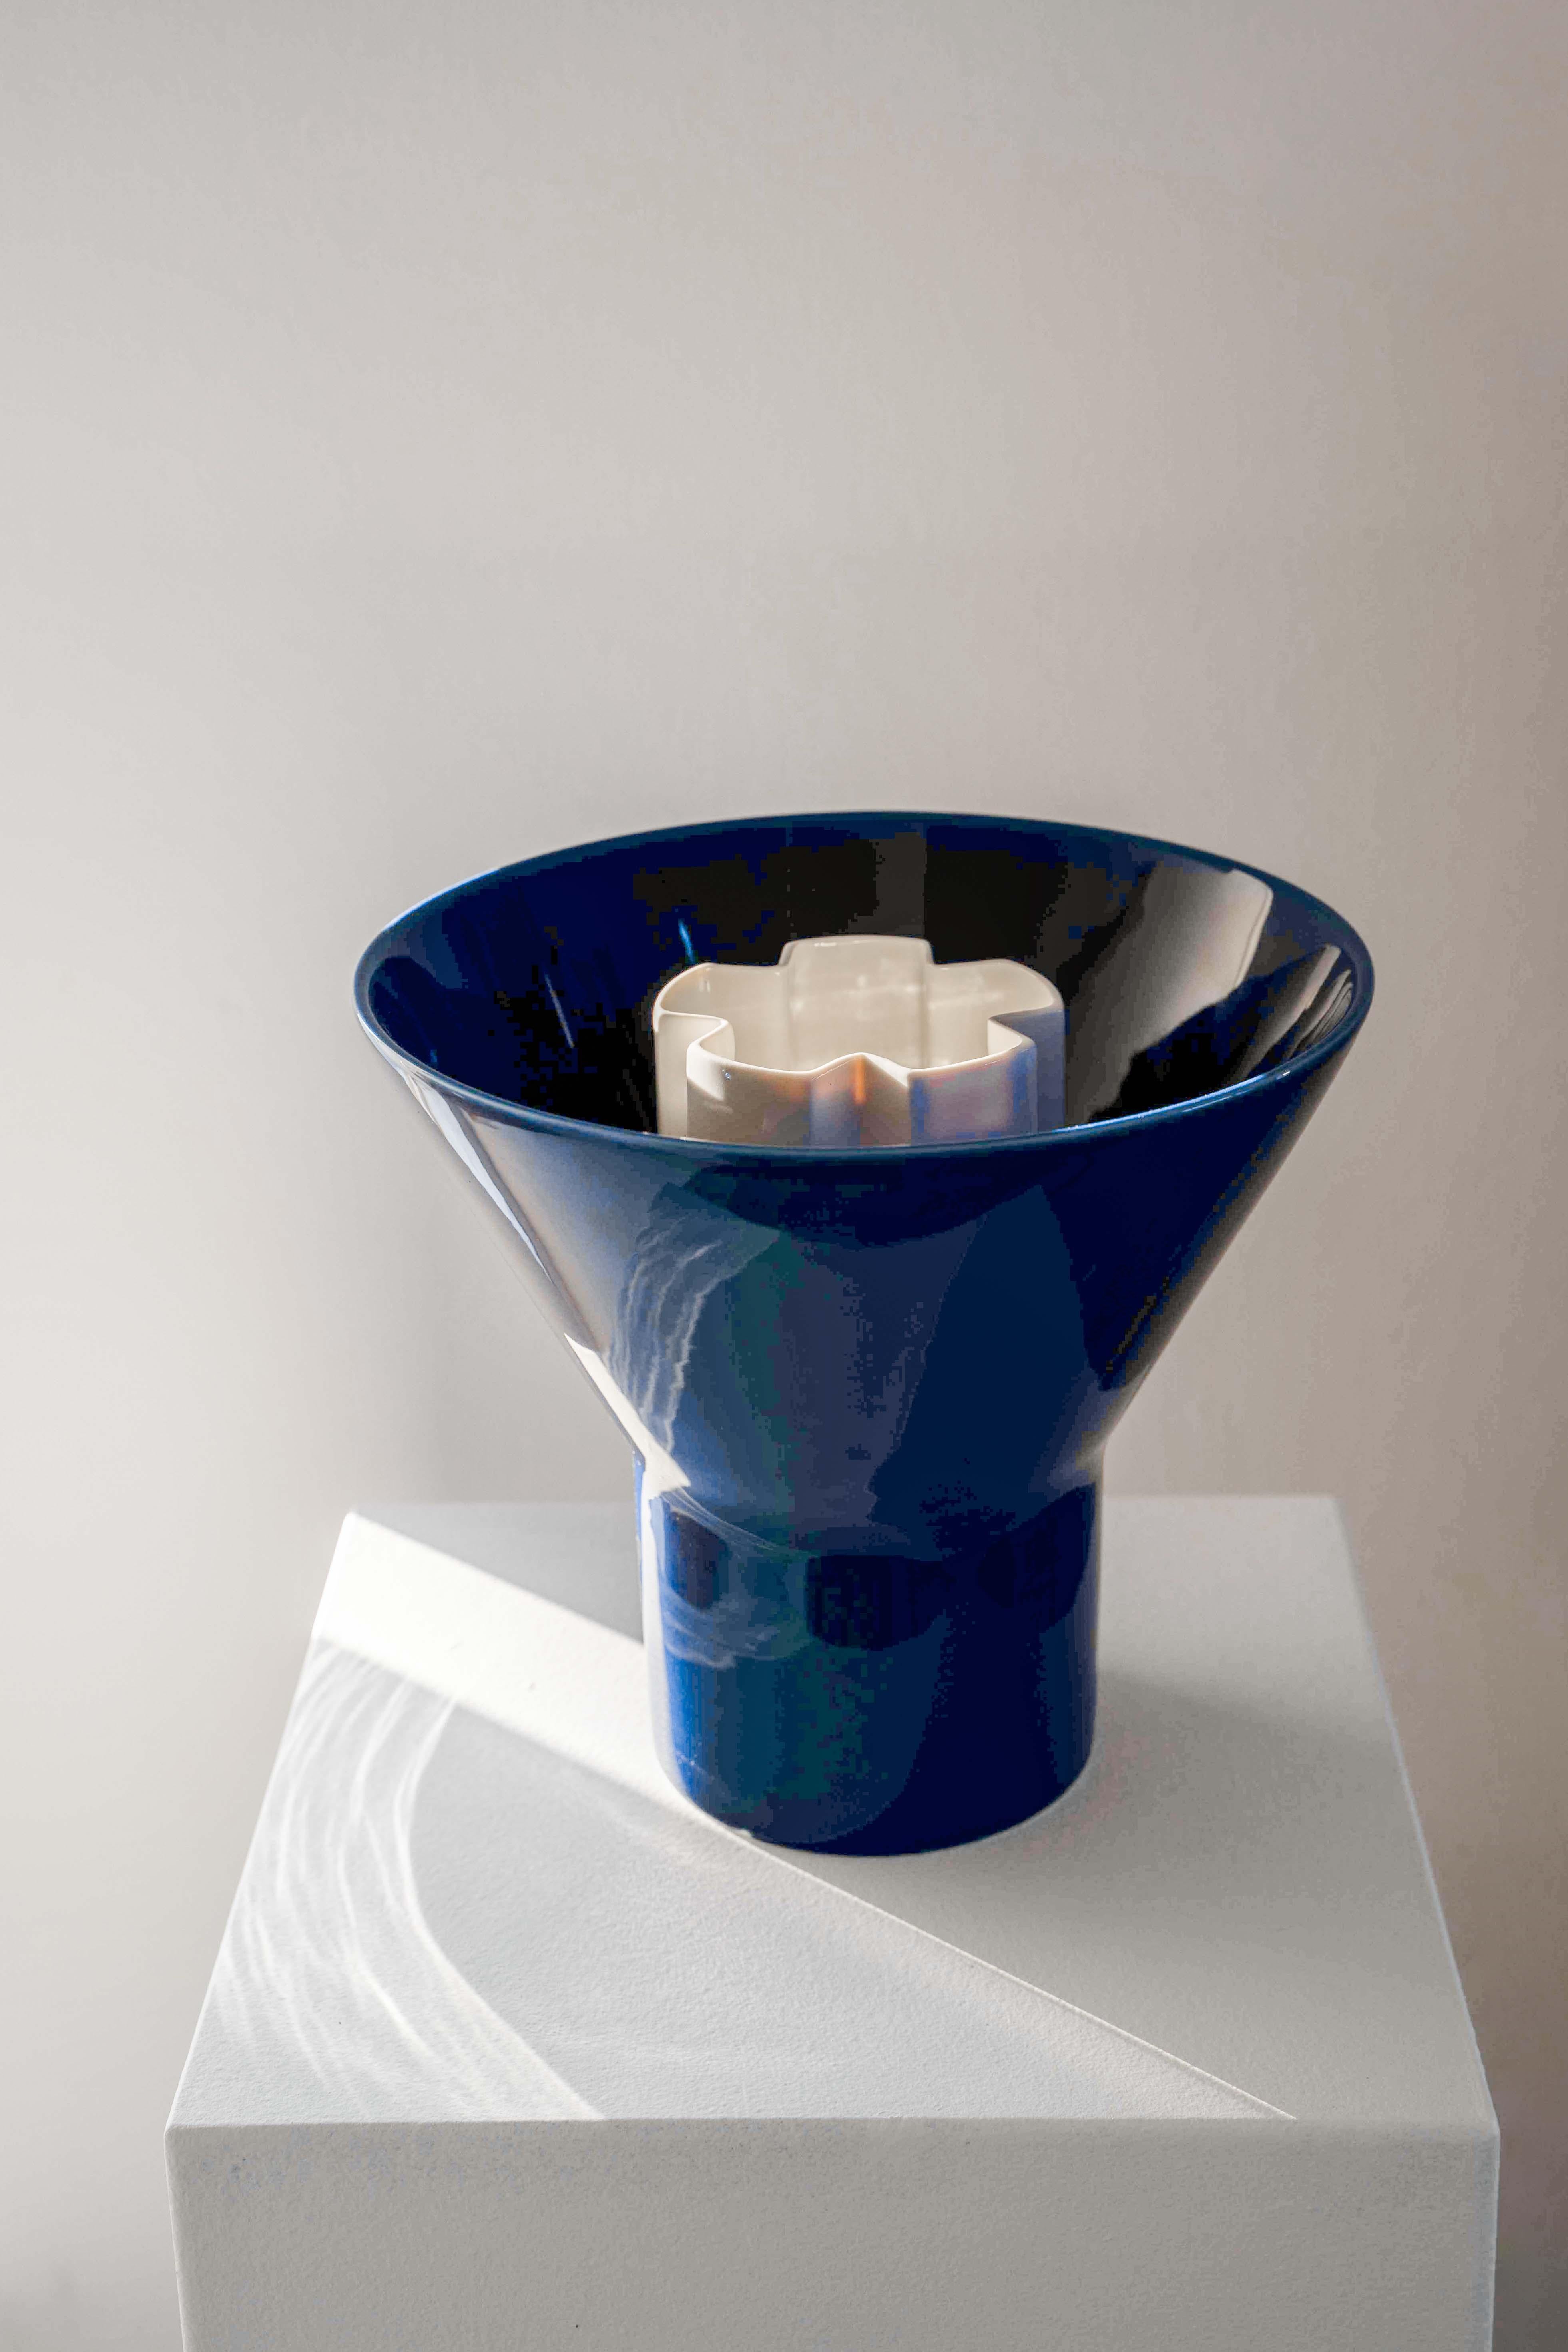 Set of blue ceramic large KYO vase and white large Kyo vase star by Mazo Design
Dimensions: D 29 x H 26 cm / D 12 x H 23.5 cm
Materials: glazed ceramic.

Both functional and sculptural, the new collection from mazo is very Scandinavian and